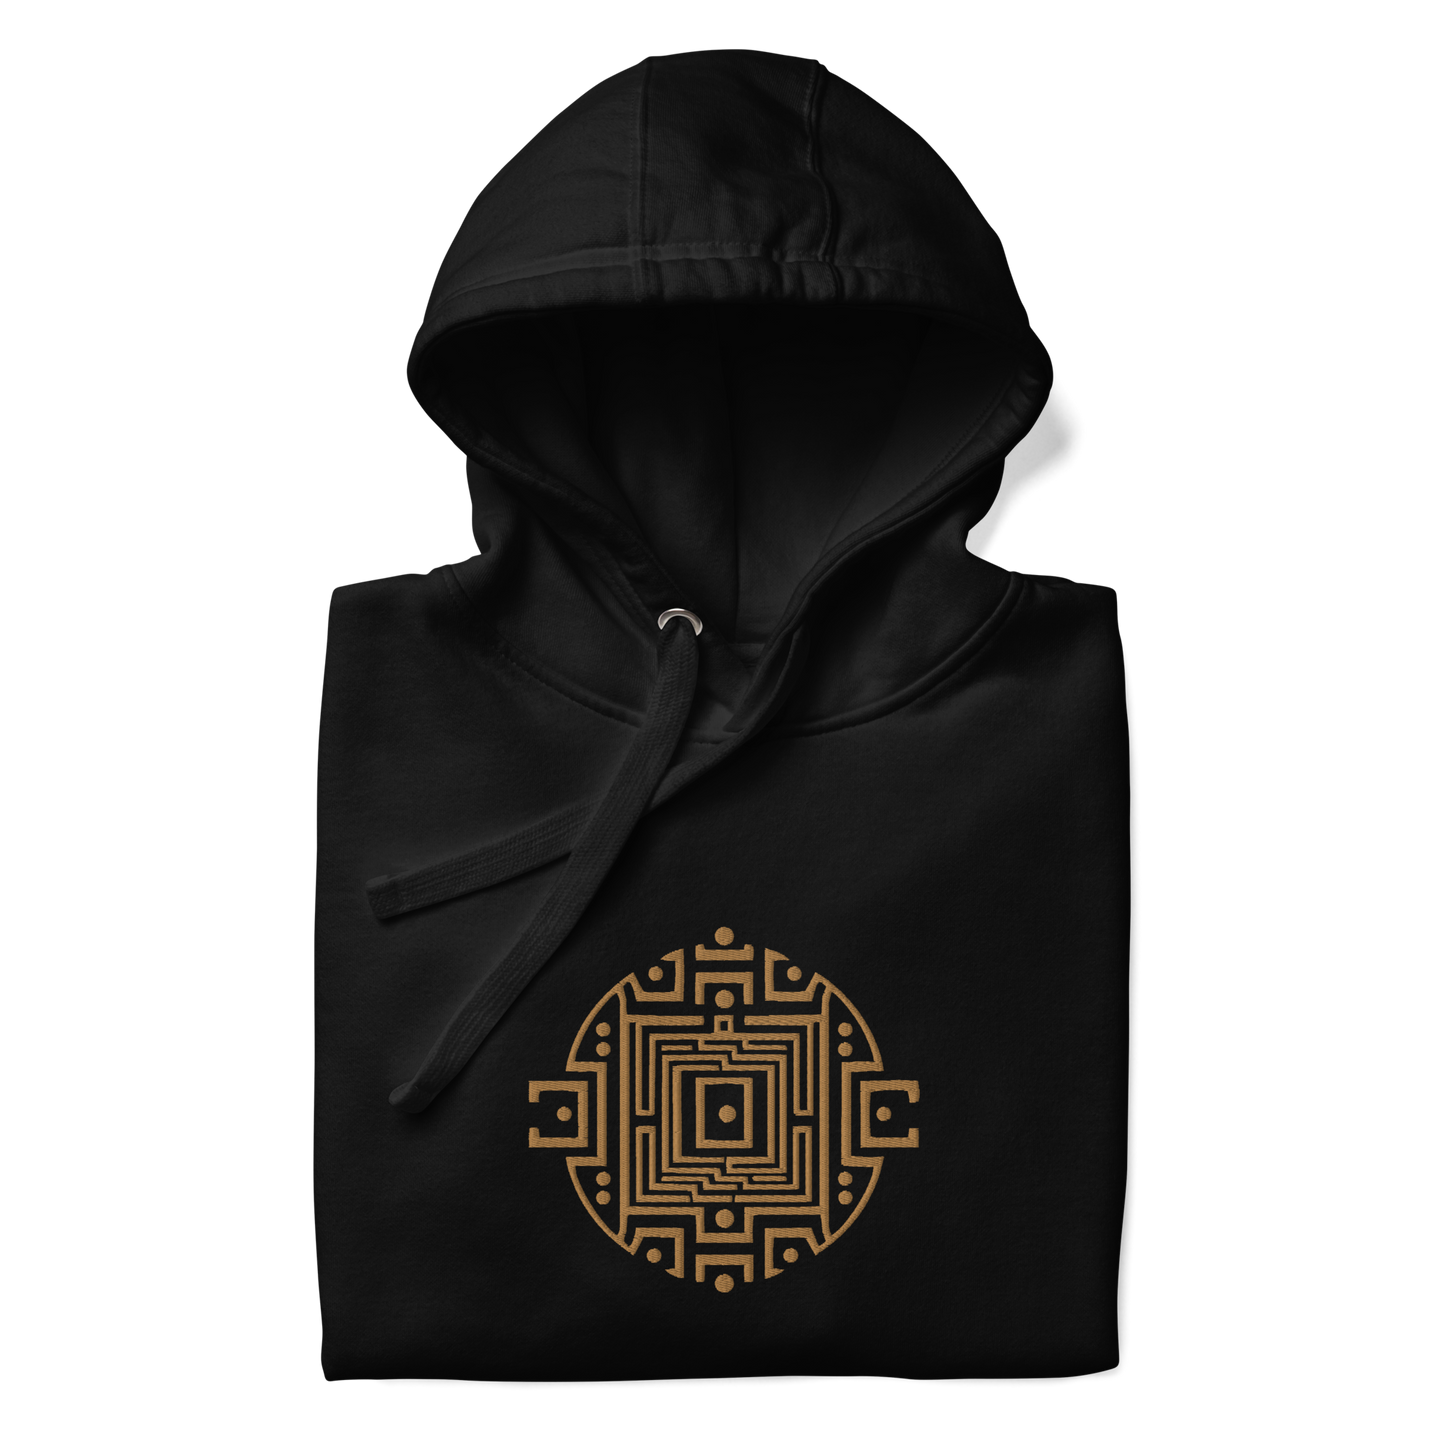 Abstract Labyrinth Embroidery - Hoodie